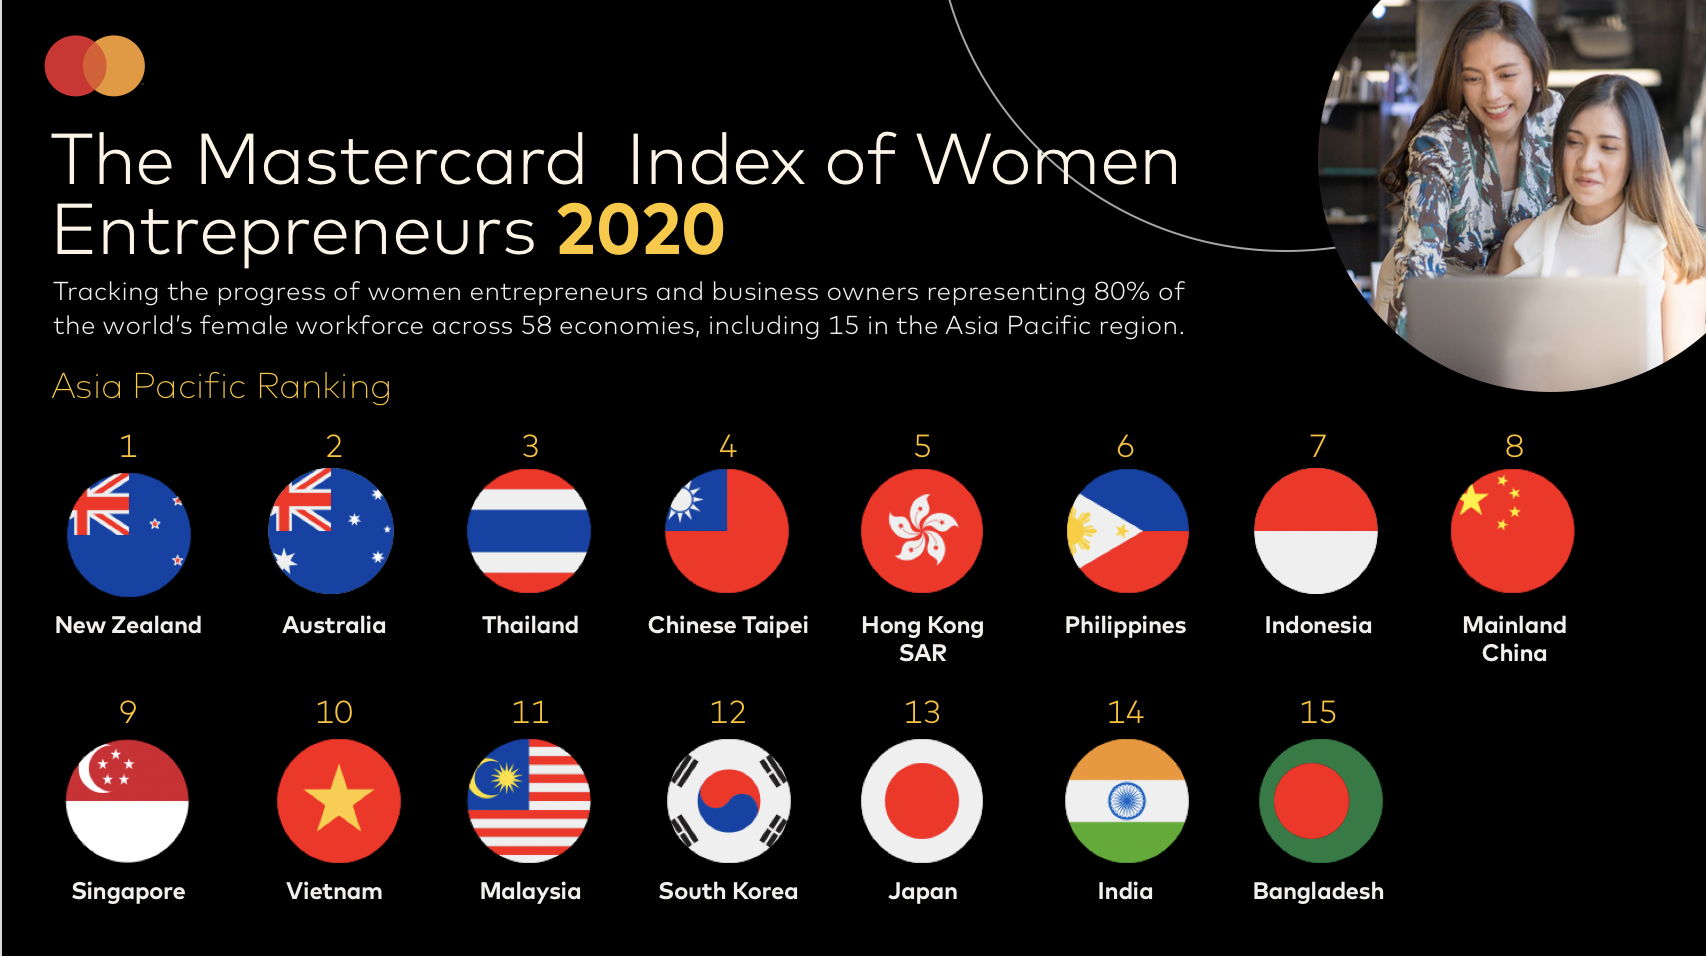 New Zealand, Australia, Thailand, Chinese Taipei, Hong Kong SAR, Philippines and Indonesia make the list of the top 20 economies globally offering the most supportive entrepreneurial conditions for women